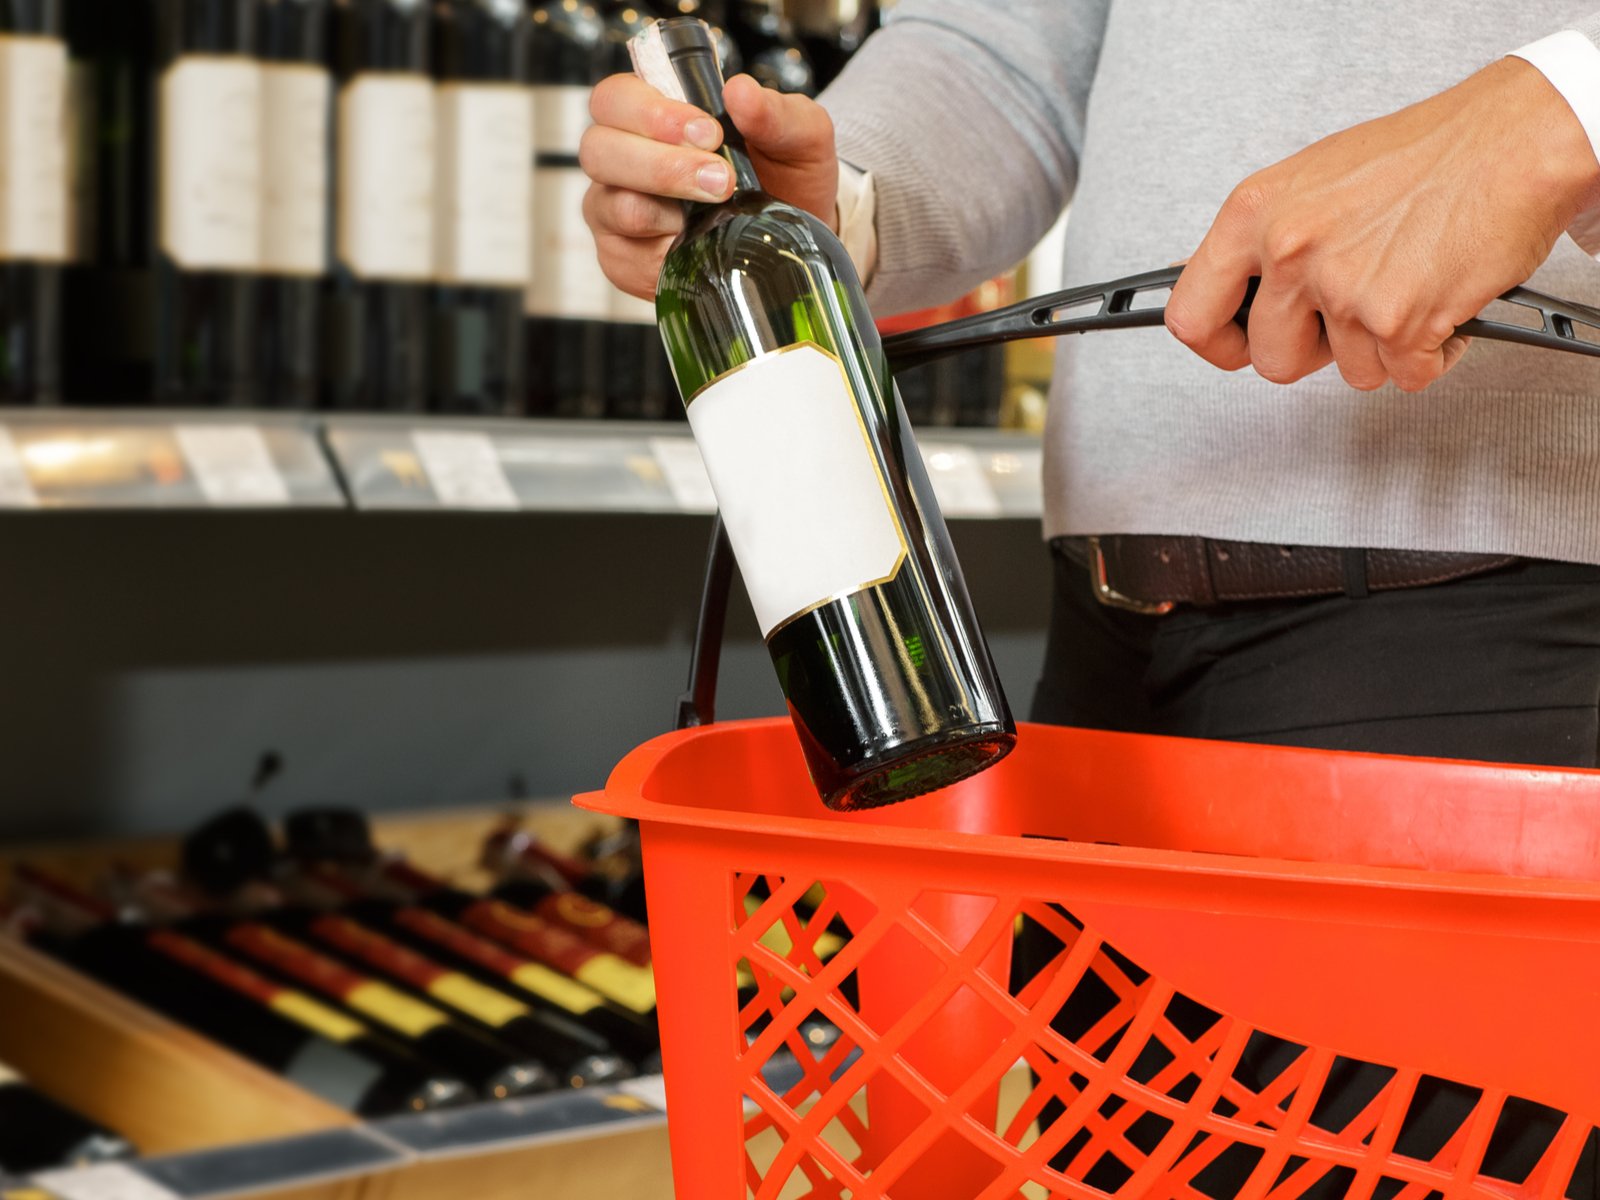 How to get bang for your buck when buying wine isn't hard with these tips.